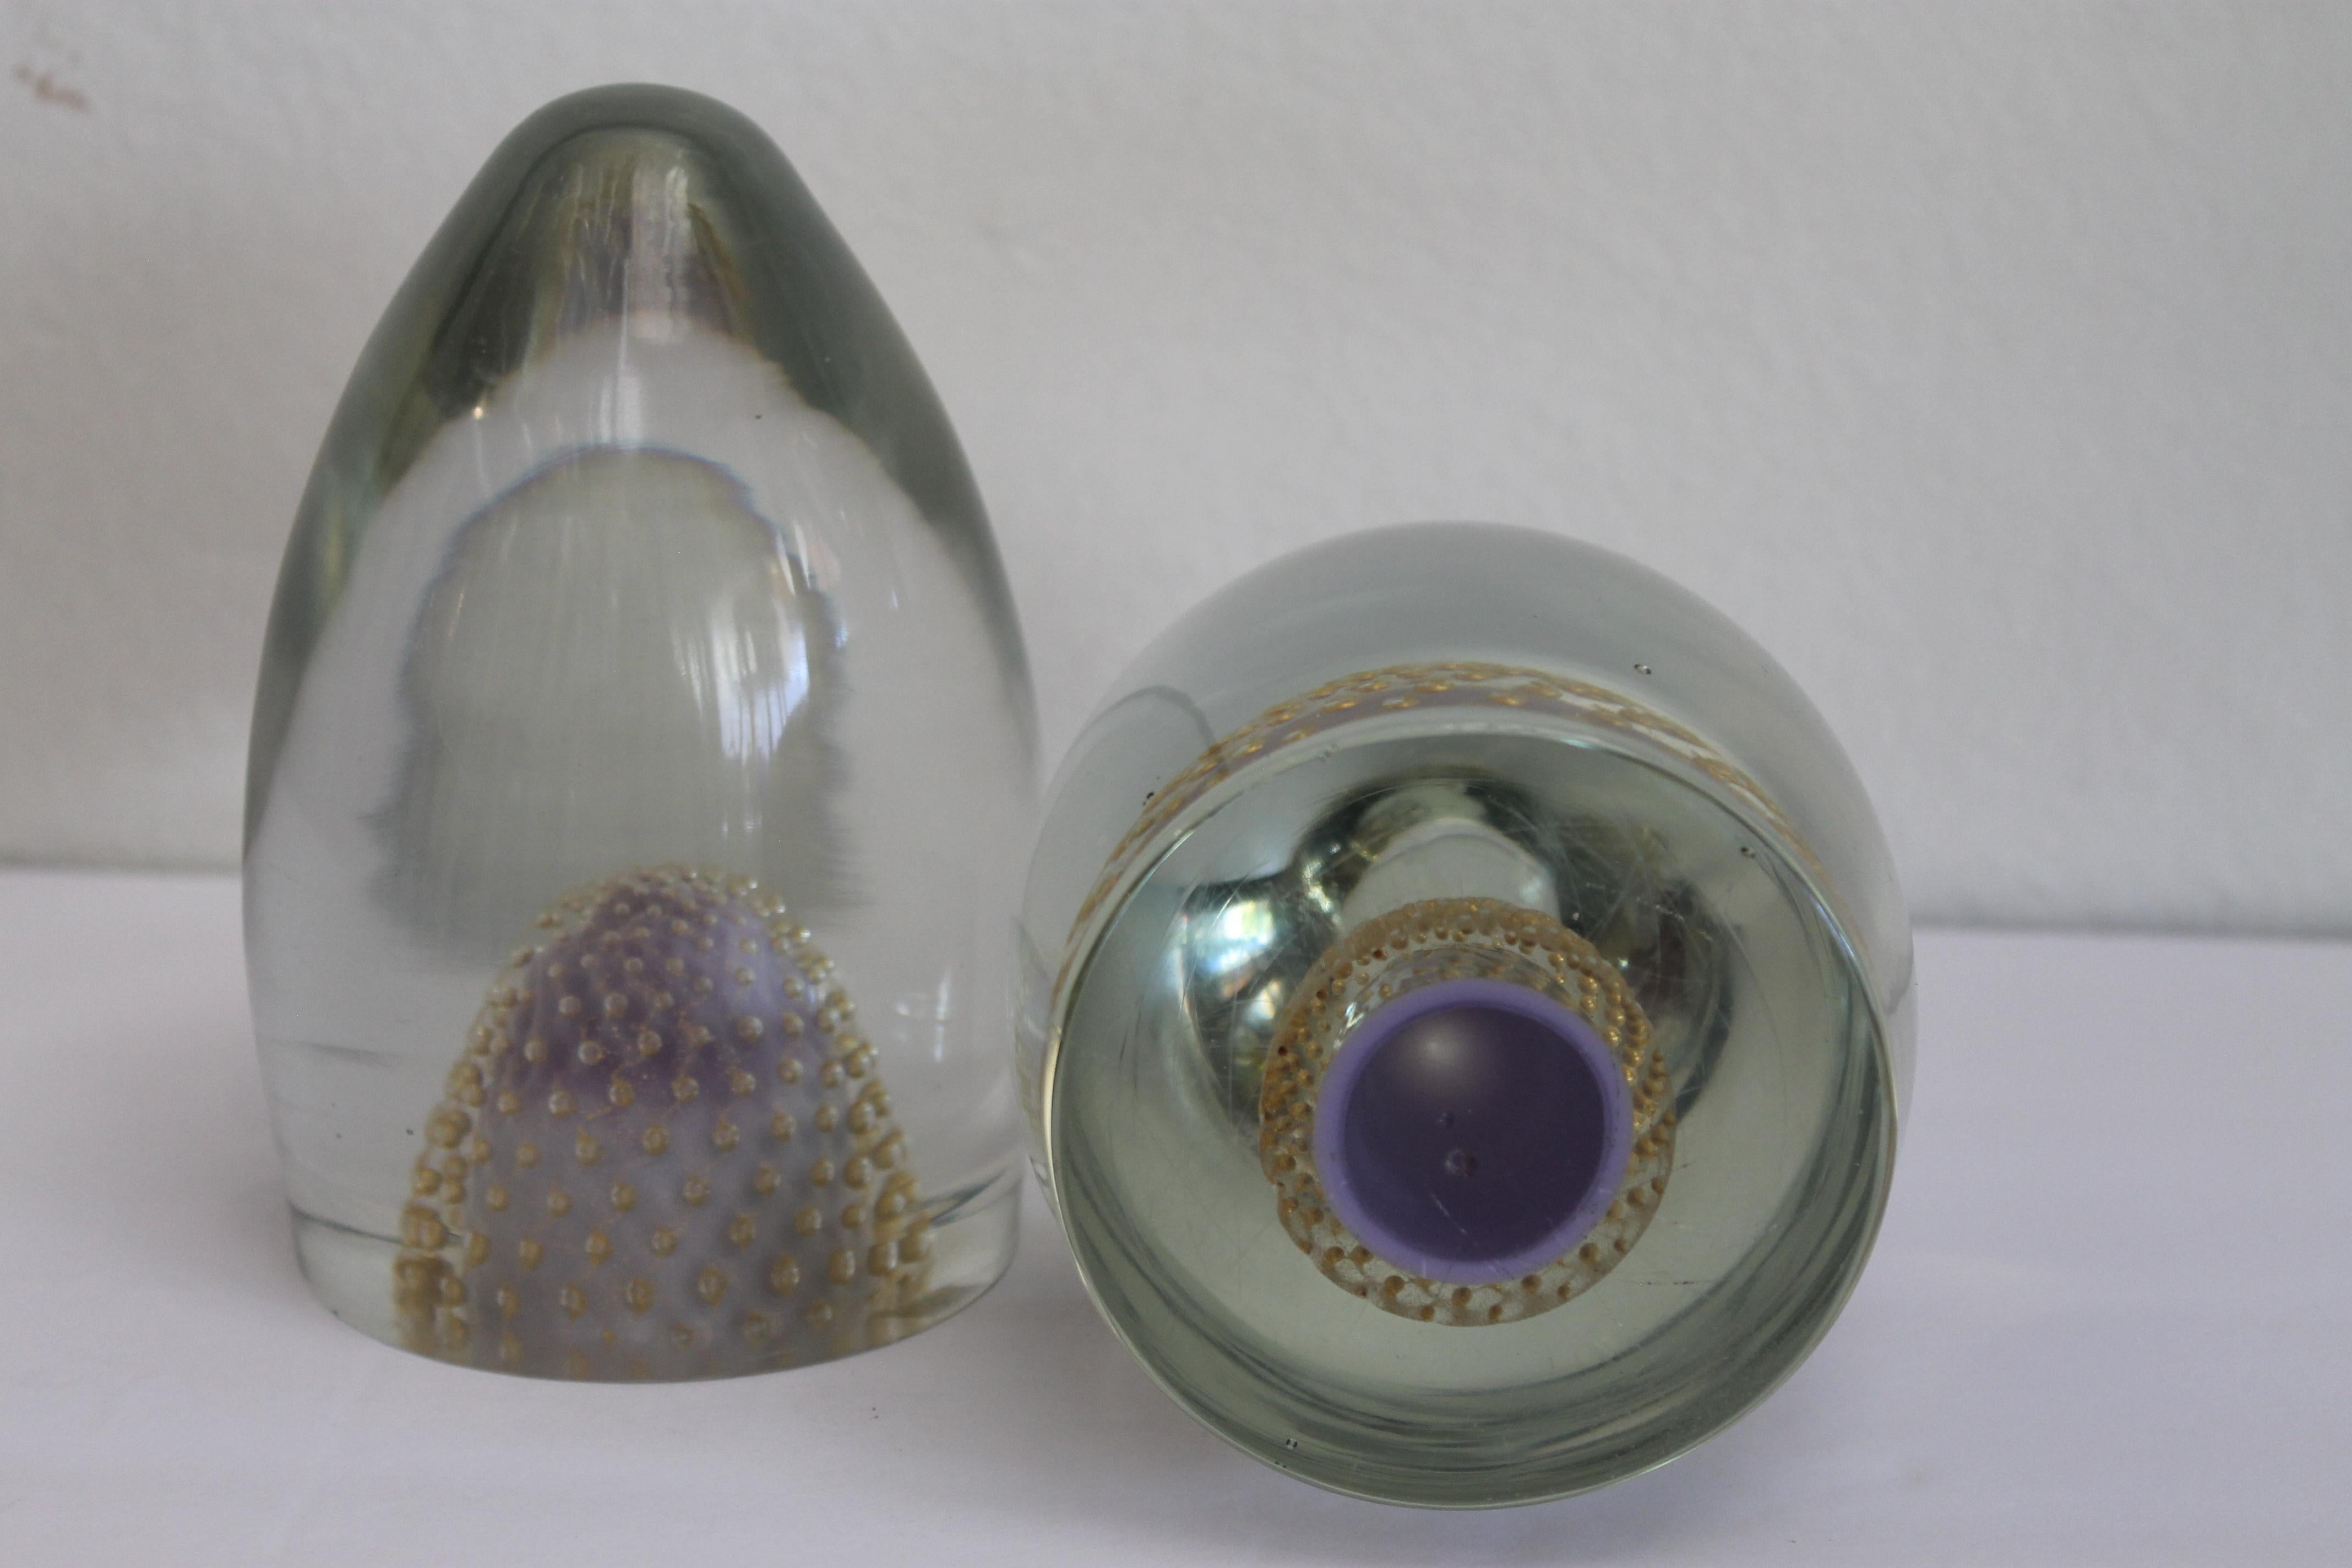 Pair of Murano glass bullet shaped sculptures or bookends attributed to Barovier. Each measure 6.25